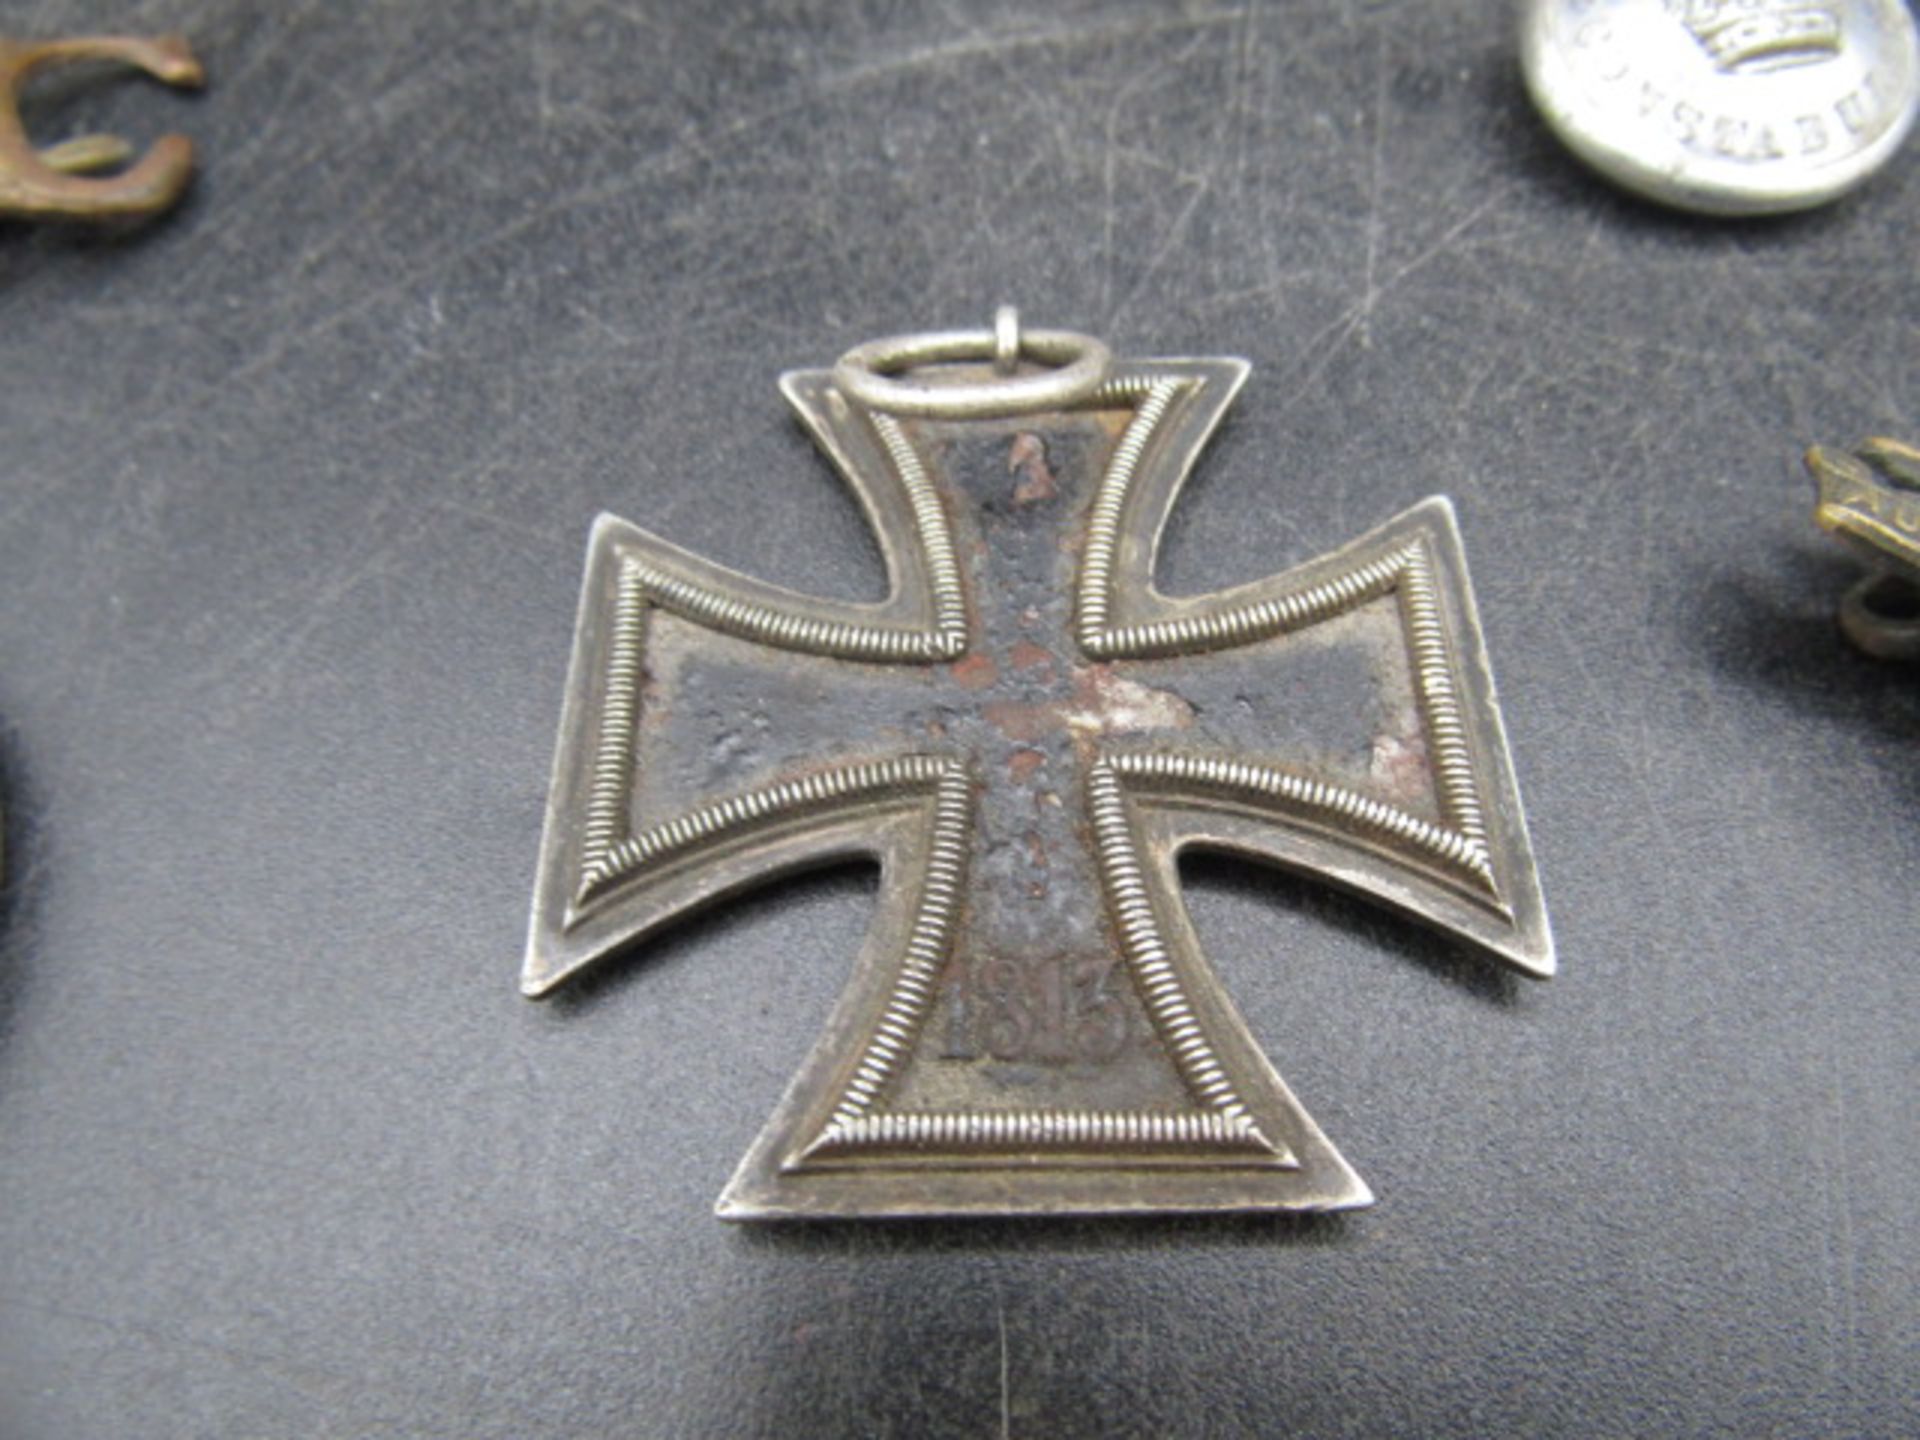 WW2 iron cross and various insignia badges and patches plus a charm bracelet - Image 9 of 9